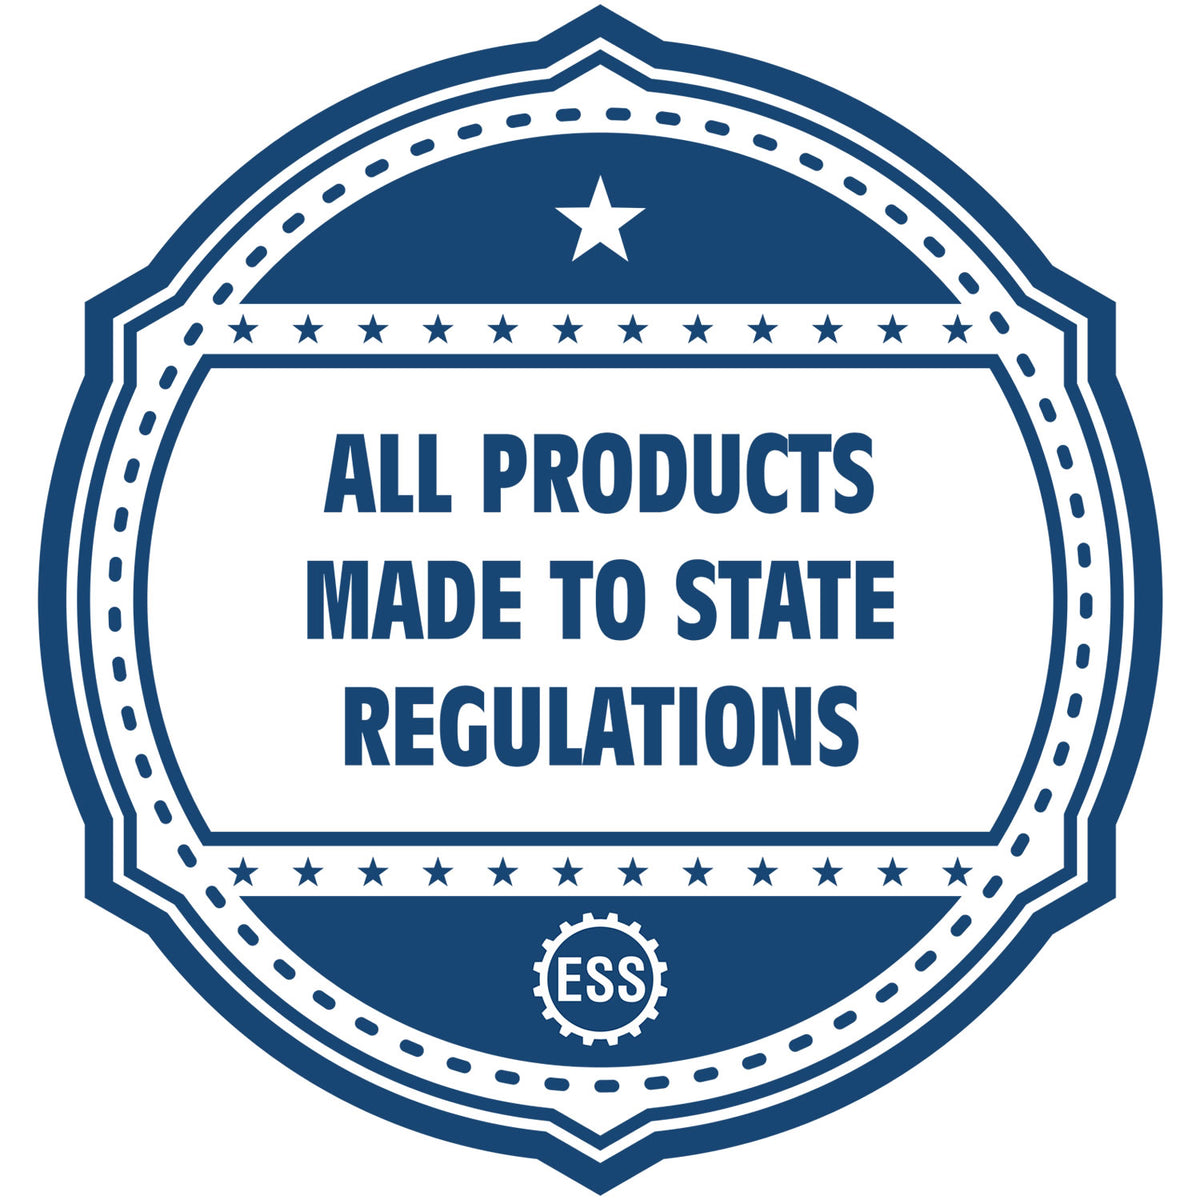 An icon or badge element for the State of Oklahoma Extended Long Reach Engineer Seal showing that this product is made in compliance with state regulations.